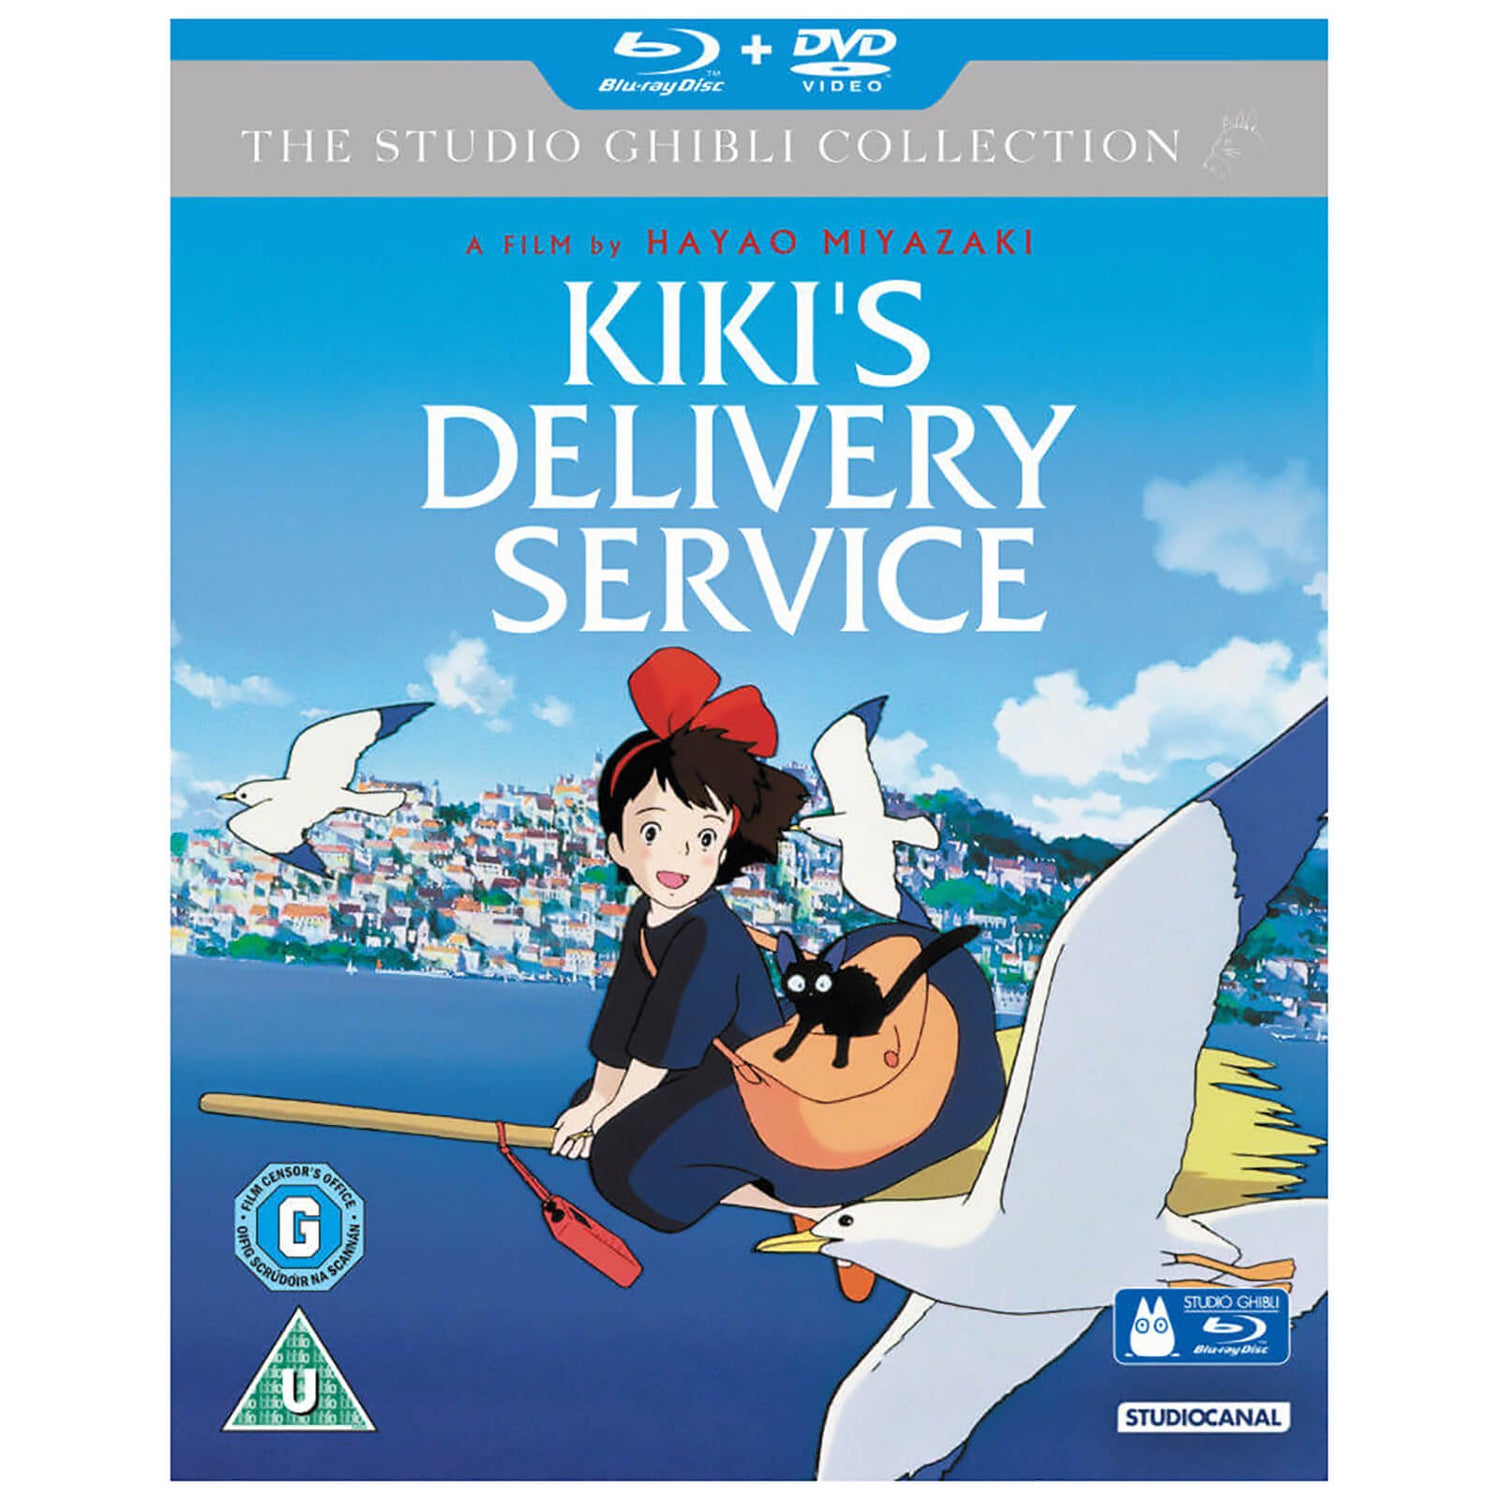 Kikis Delivery Service - Double Play (Blu-Ray and DVD)